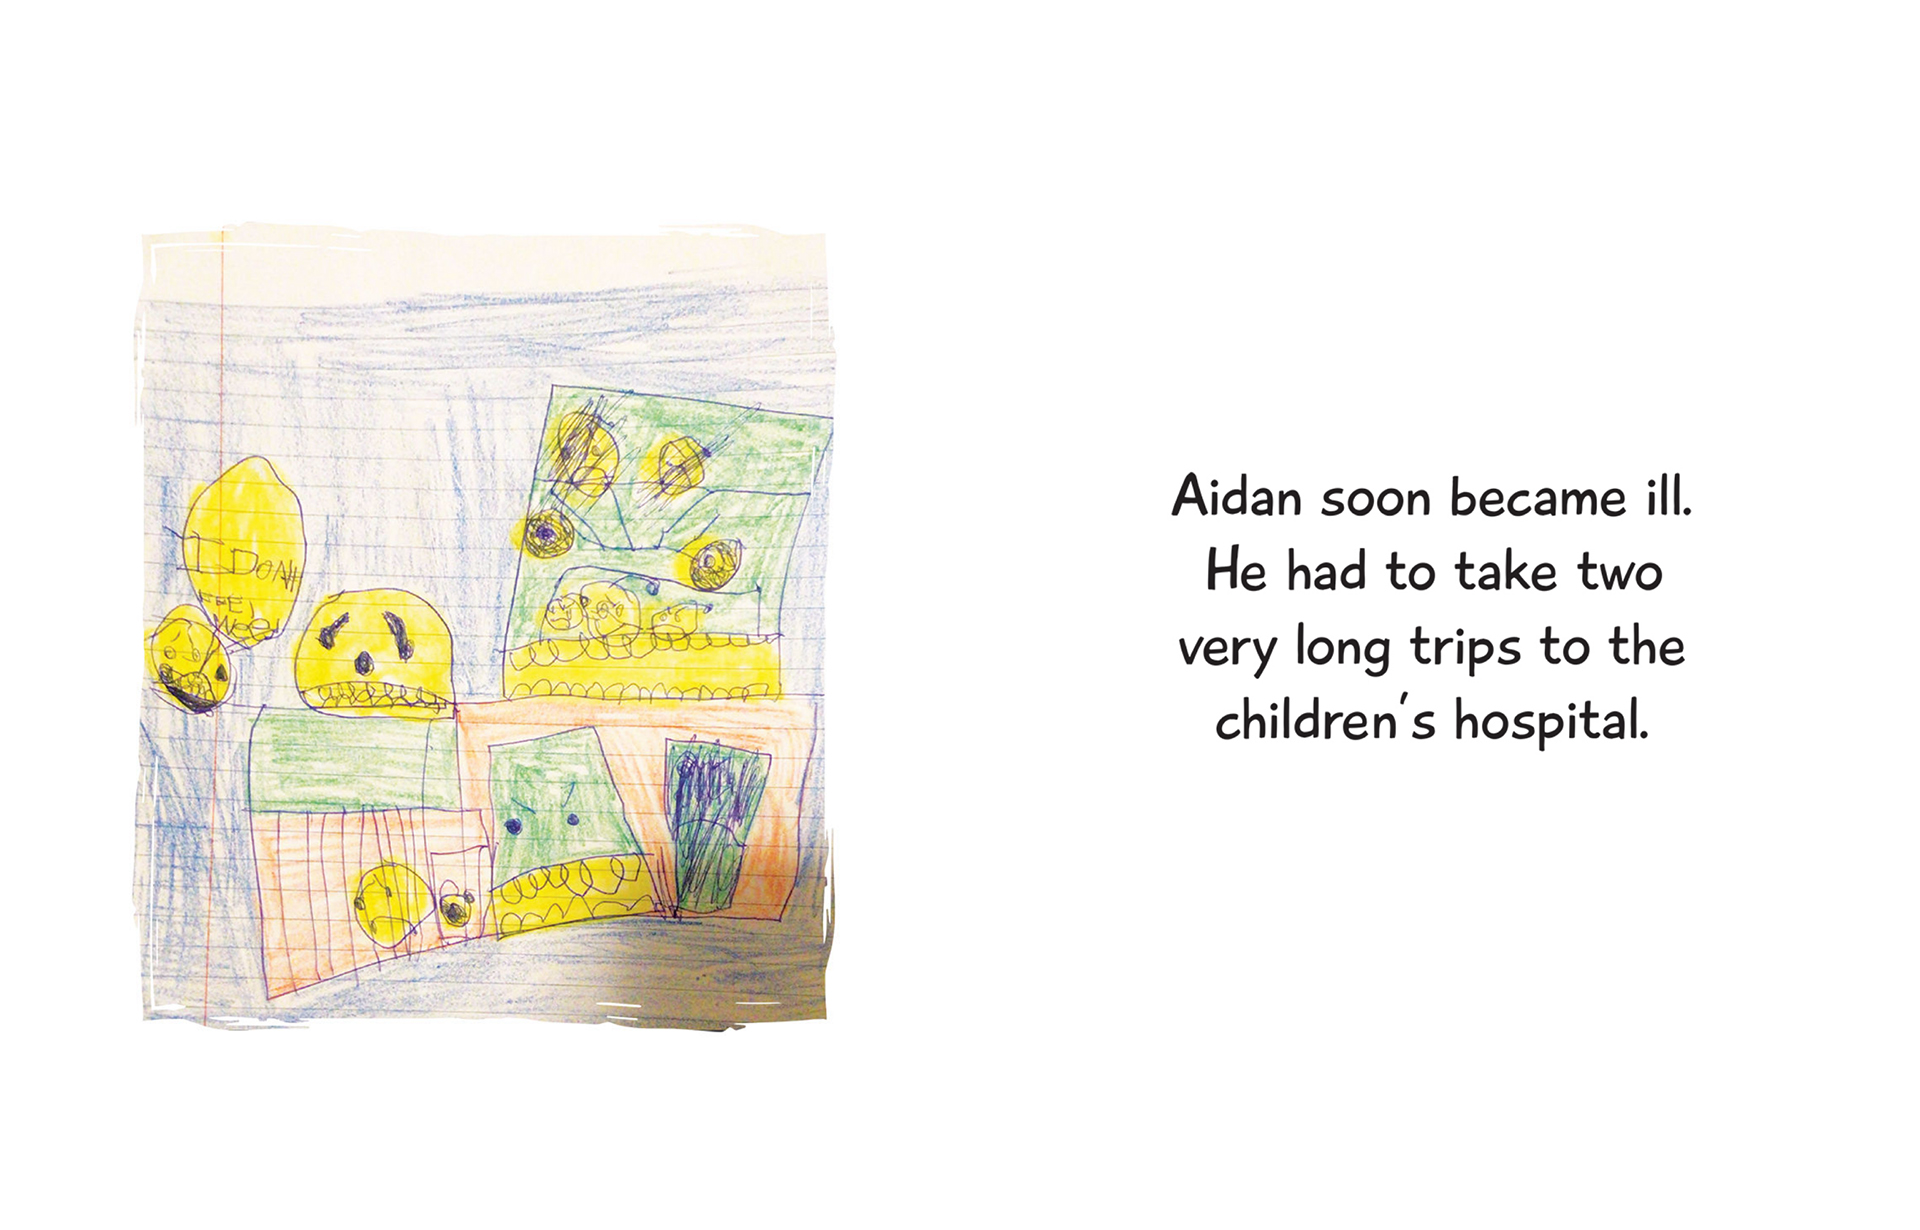 A book from a page shows an illustration on ruled paper alongside the text "Aidan soon became ill. He had two very long trips to the children's hospital."